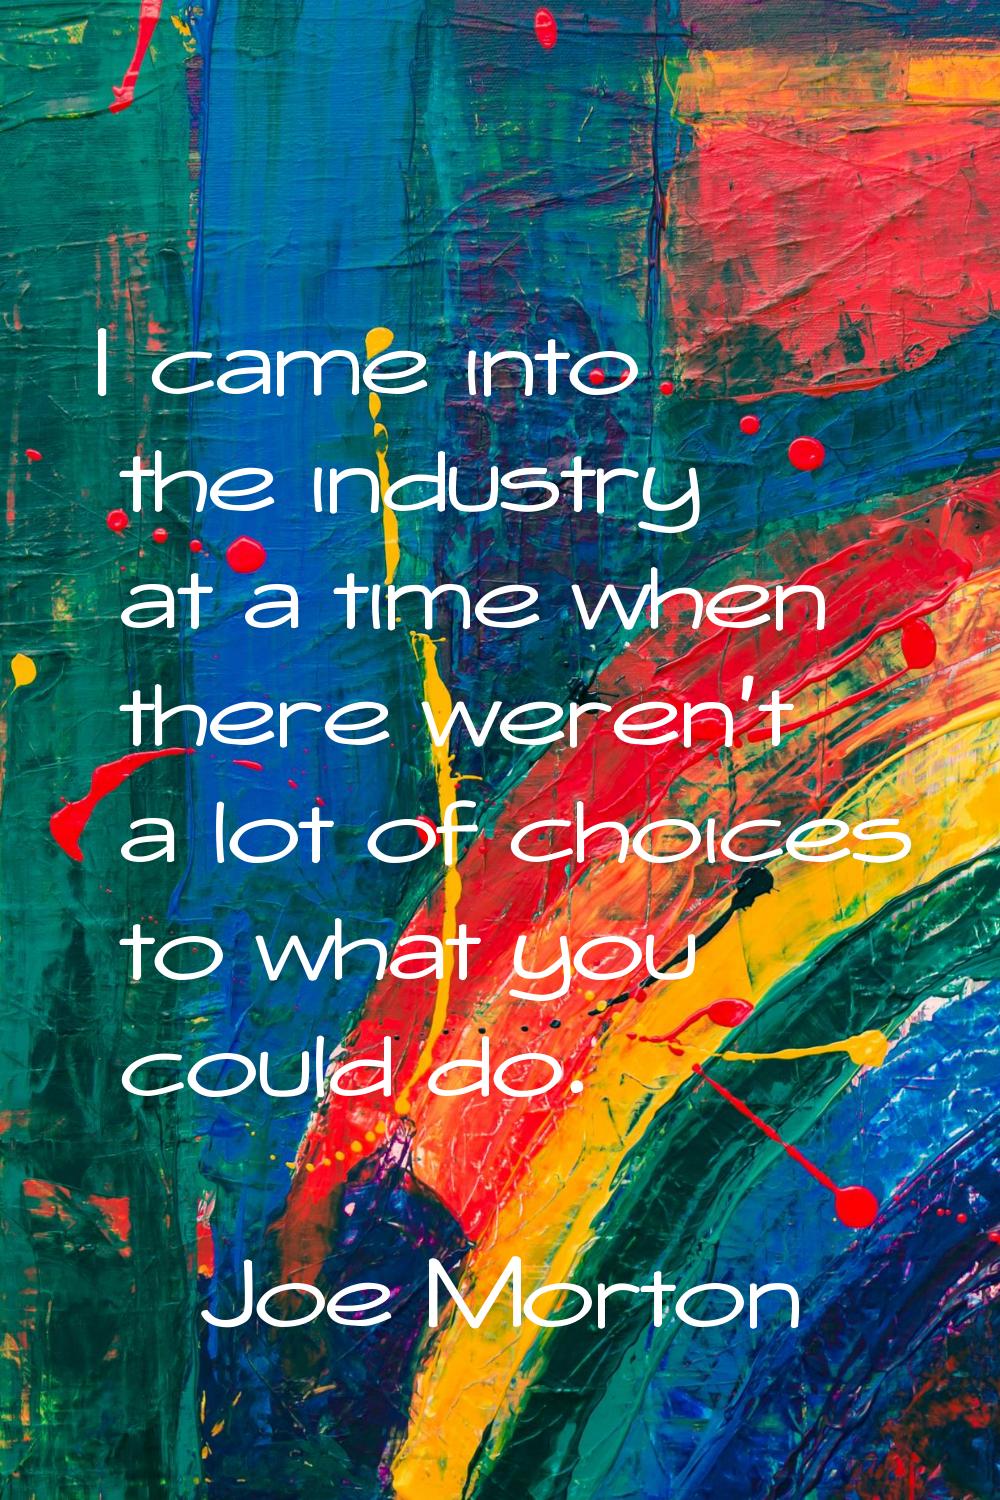 I came into the industry at a time when there weren't a lot of choices to what you could do.